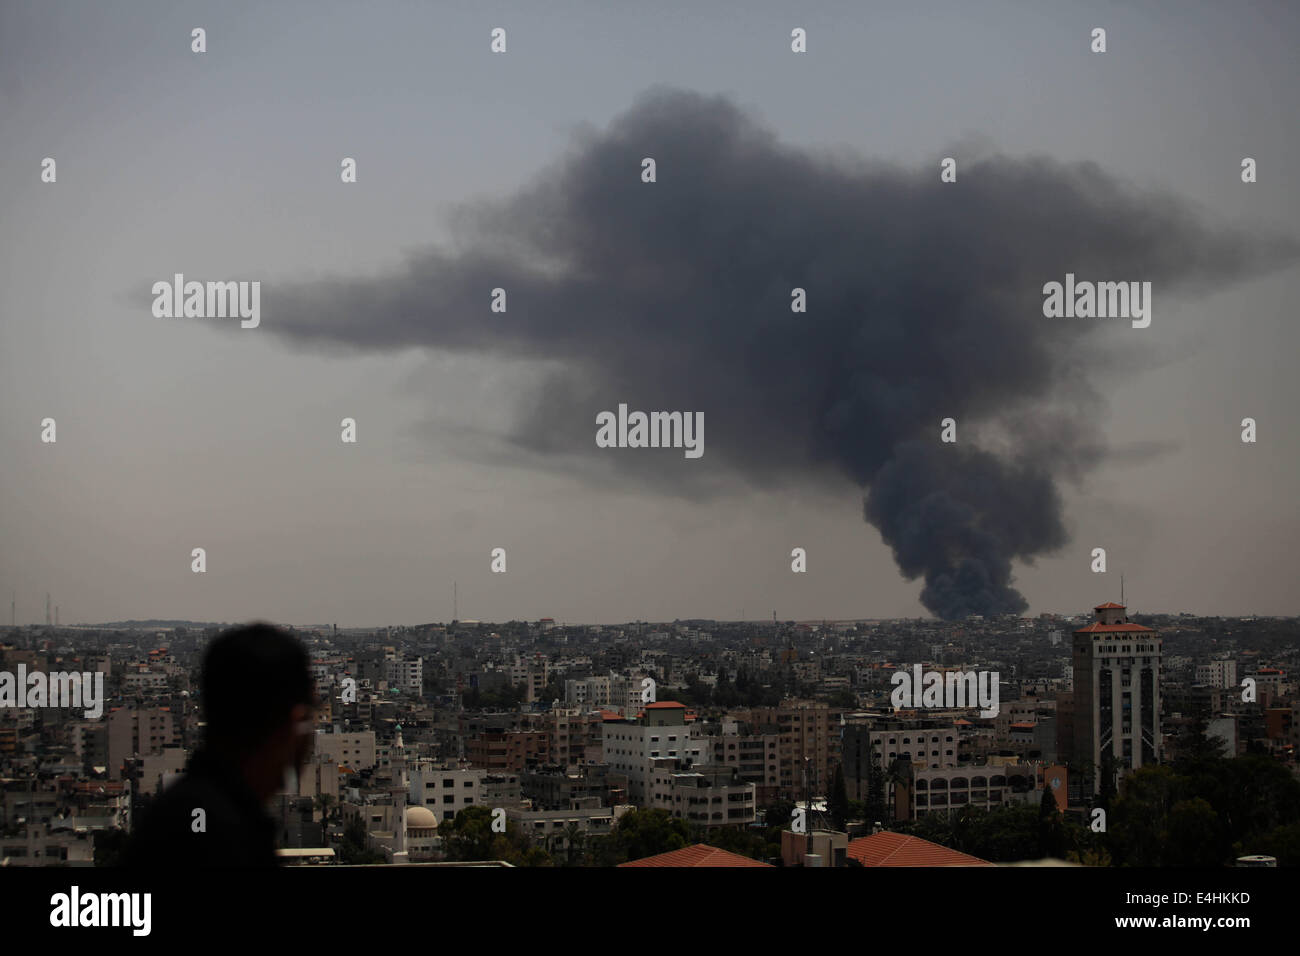 Gaza, Palestinian Territory. 12th July, 2014.  Smoke rises following an Israeli strike on Gaza, seen from the Israel-Gaza border, Saturday, July 12, 2014. Israeli airstrikes targeting Hamas in Gaza hit a mosque its military says concealed the militant group's weapons, in an offensive that showed no signs of slowing down. Israel launched its campaign five days ago to stop relentless rocket fire on its citizens. While there have been no fatalities in Israel, Palestinian officials said overnight attacks raised the death toll there to over 120, with more than 920 wounded. (Credit Imag Stock Photo